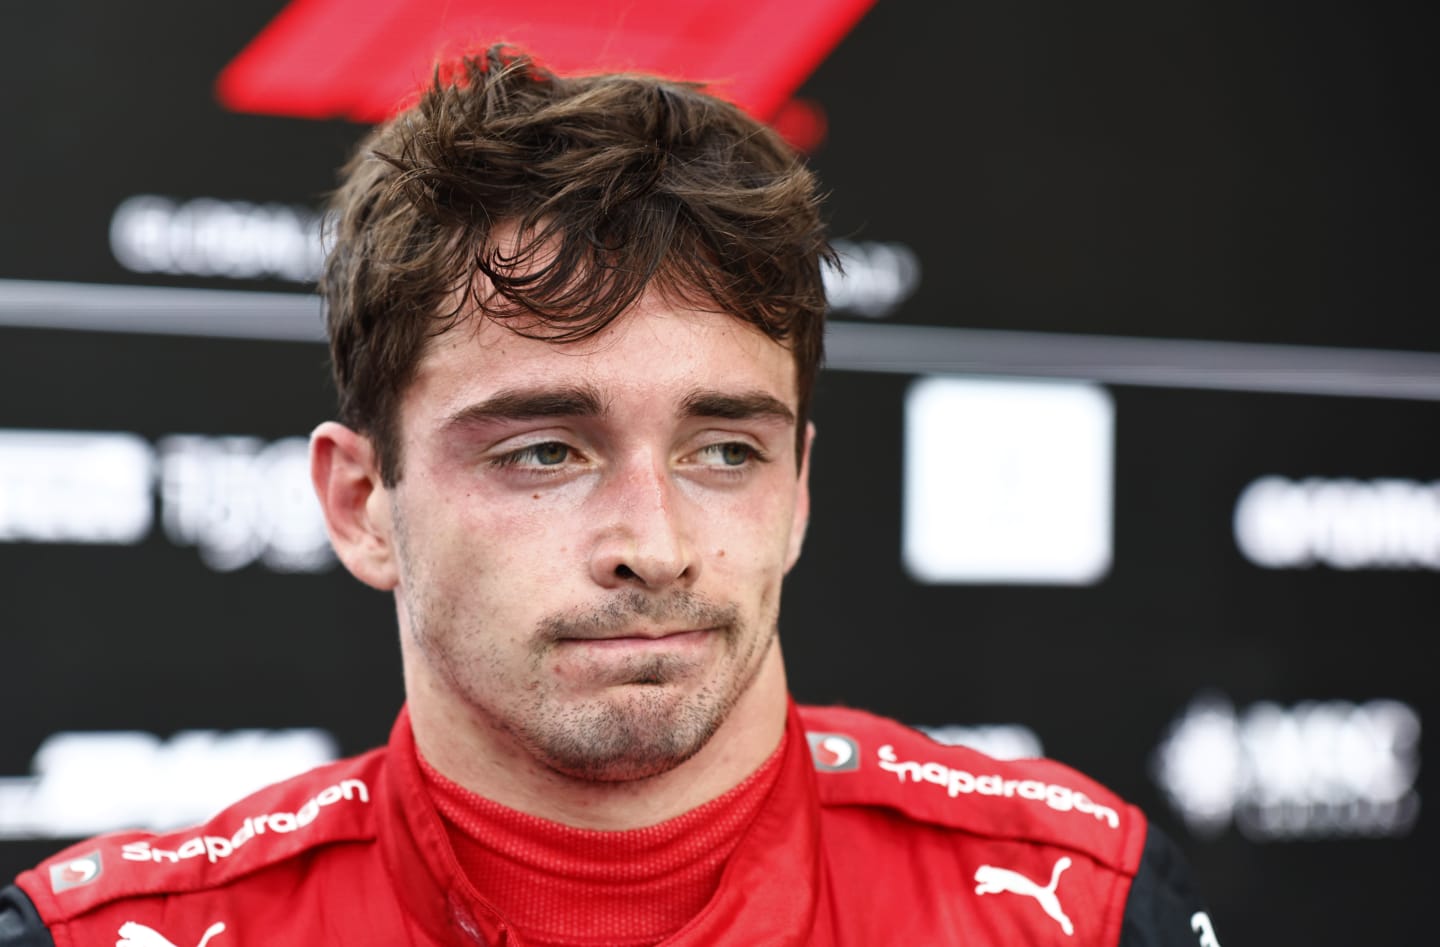 MIAMI, FLORIDA - MAY 08: Second placed Charles Leclerc of Monaco and Ferrari looks on in parc ferme during the F1 Grand Prix of Miami at the Miami International Autodrome on May 08, 2022 in Miami, Florida. (Photo by Jared C. Tilton/Getty Images)